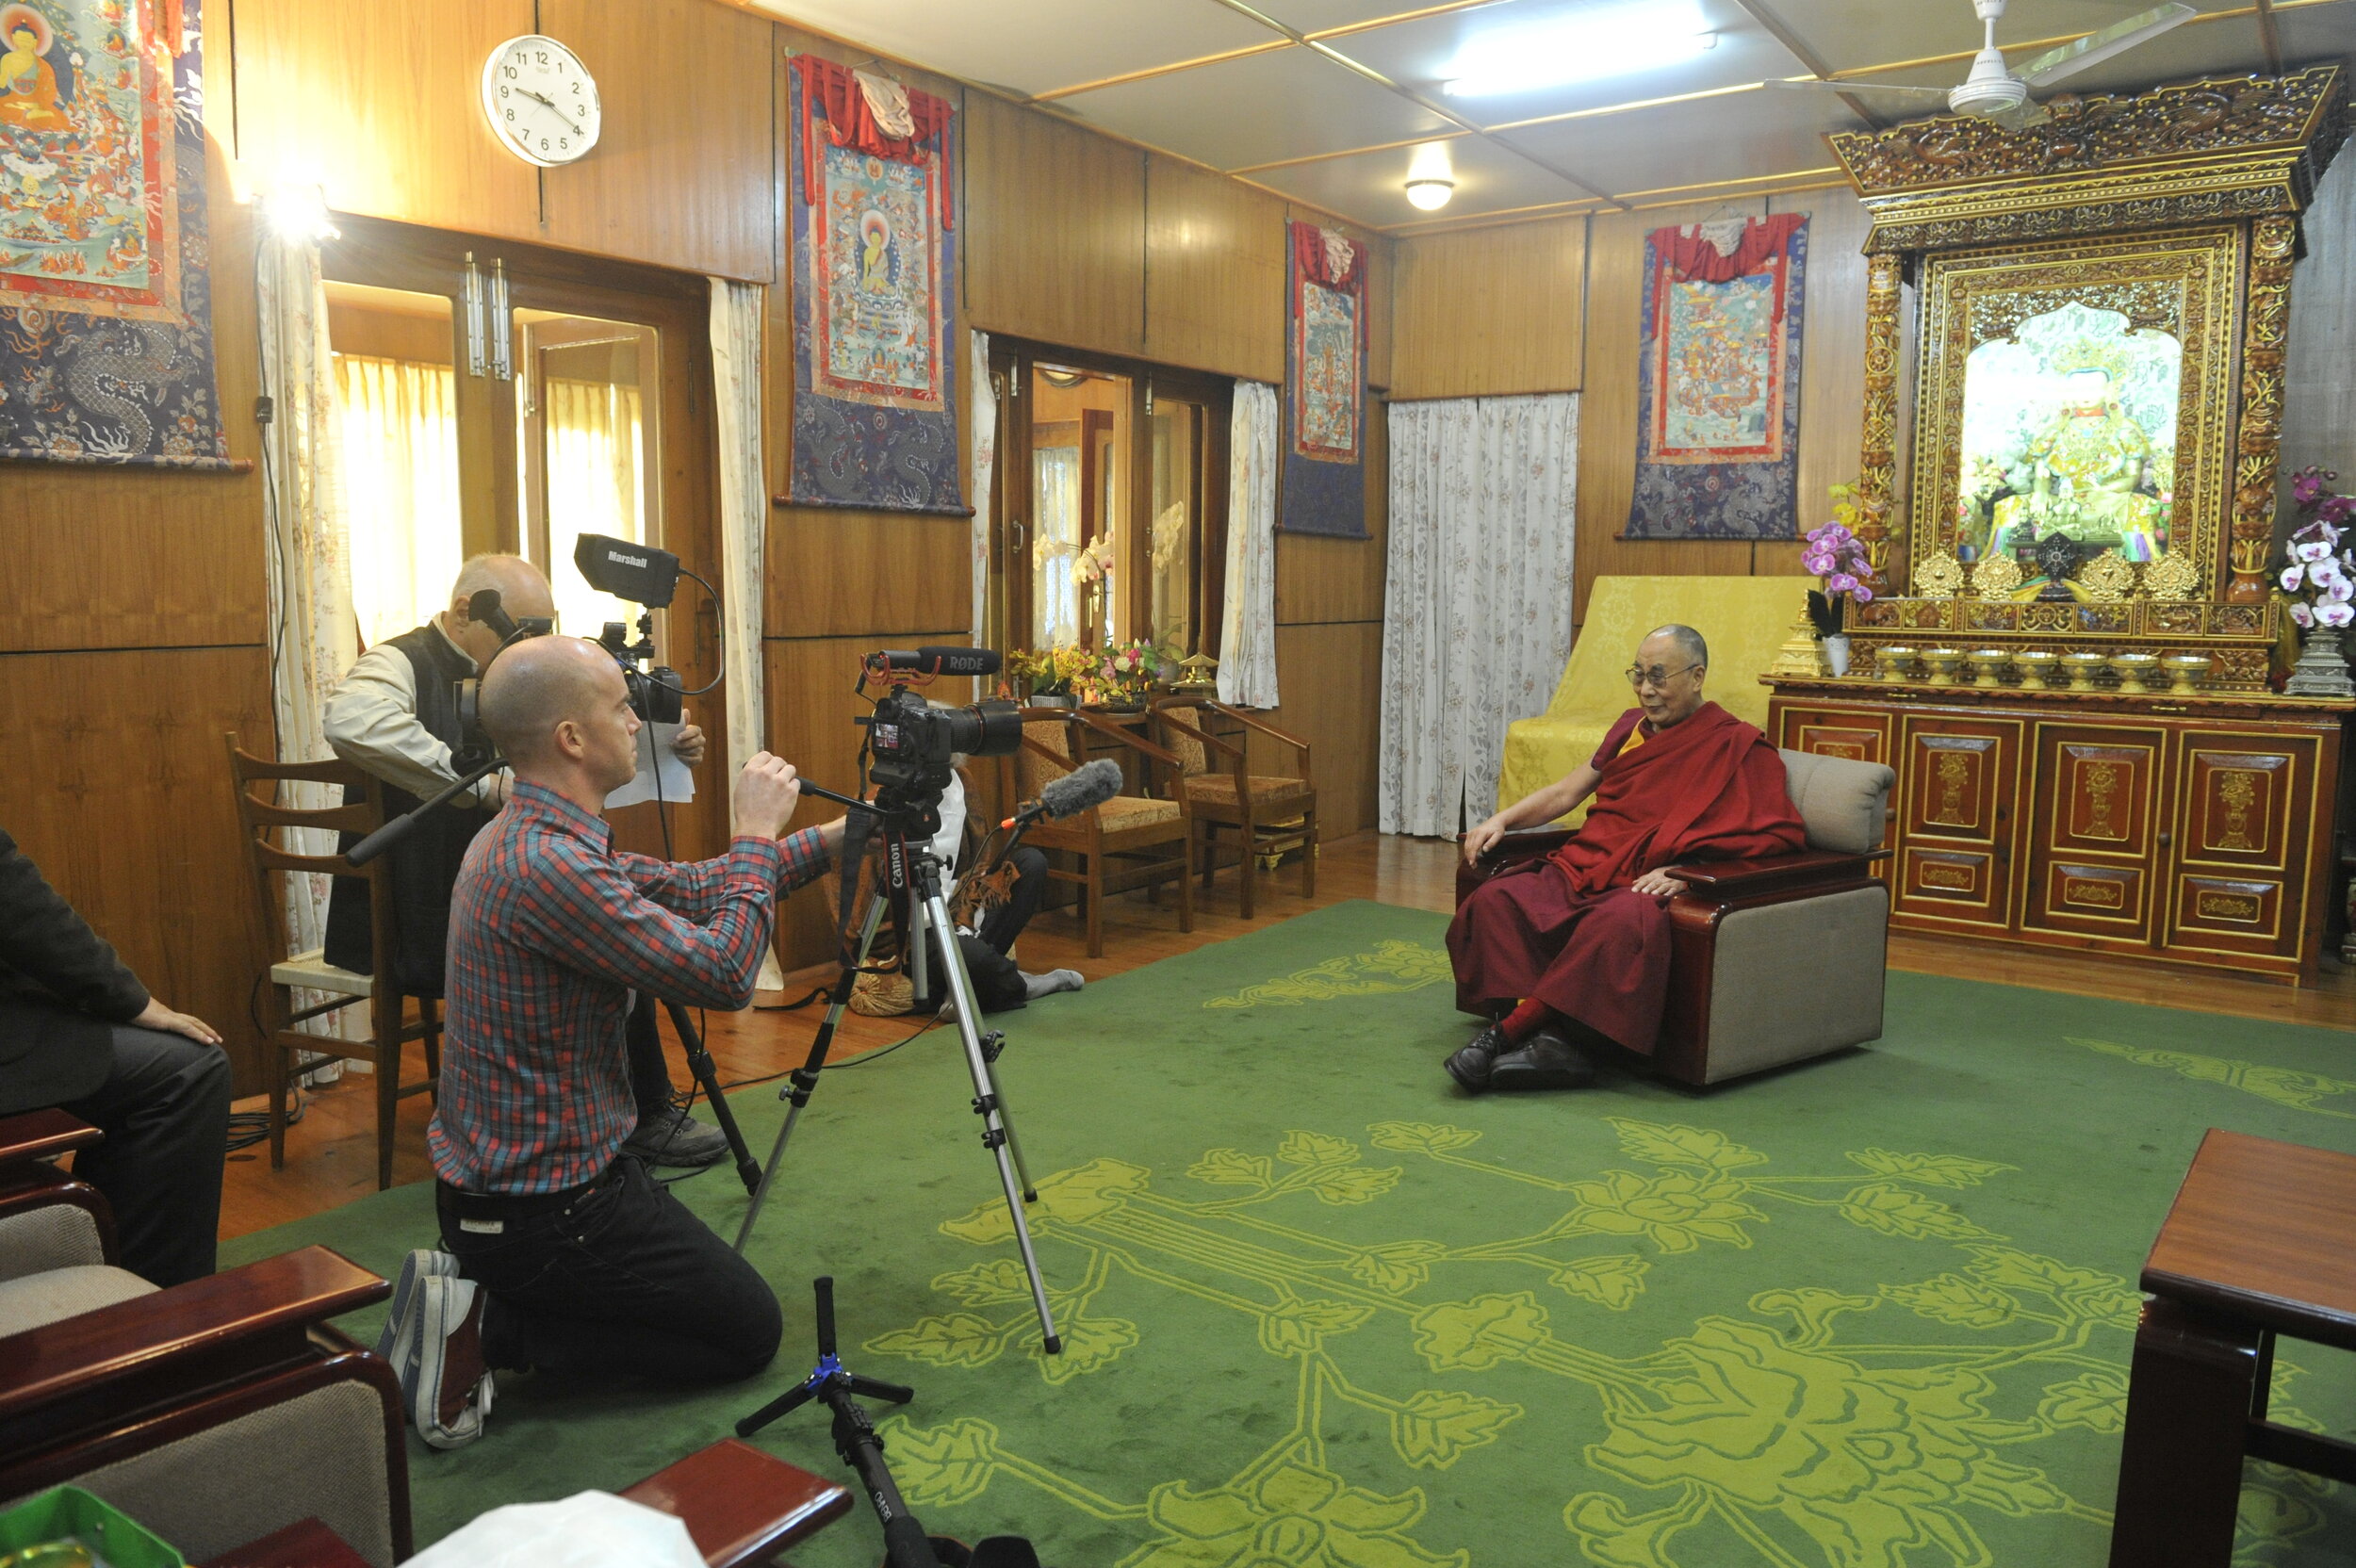 2015-11-20 09.19.29 The Inrerview with HHDL.jpg